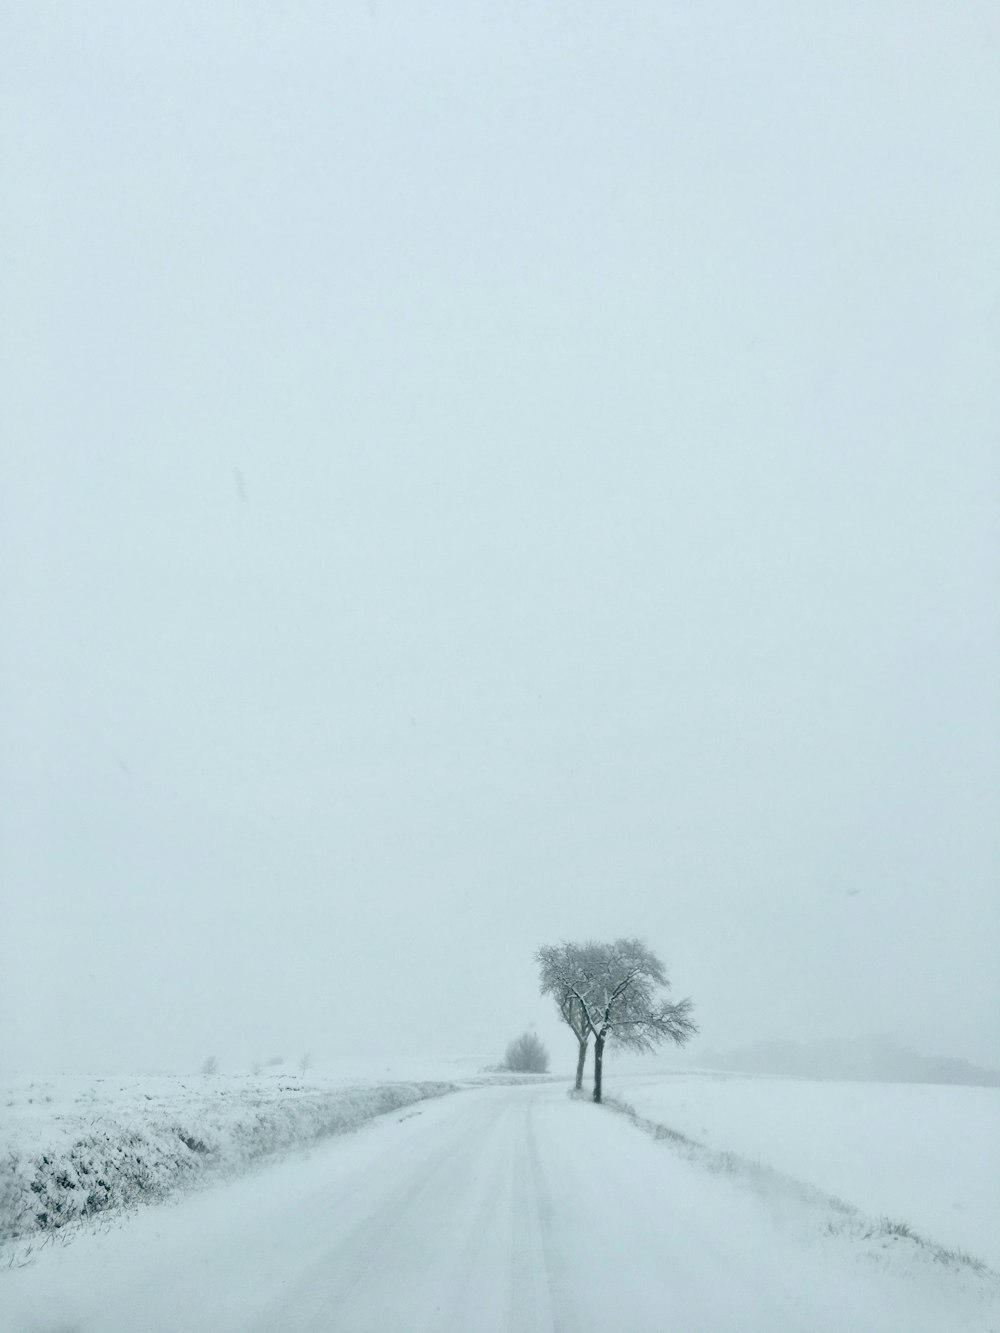 snow-covered road and tree on a cloudy day